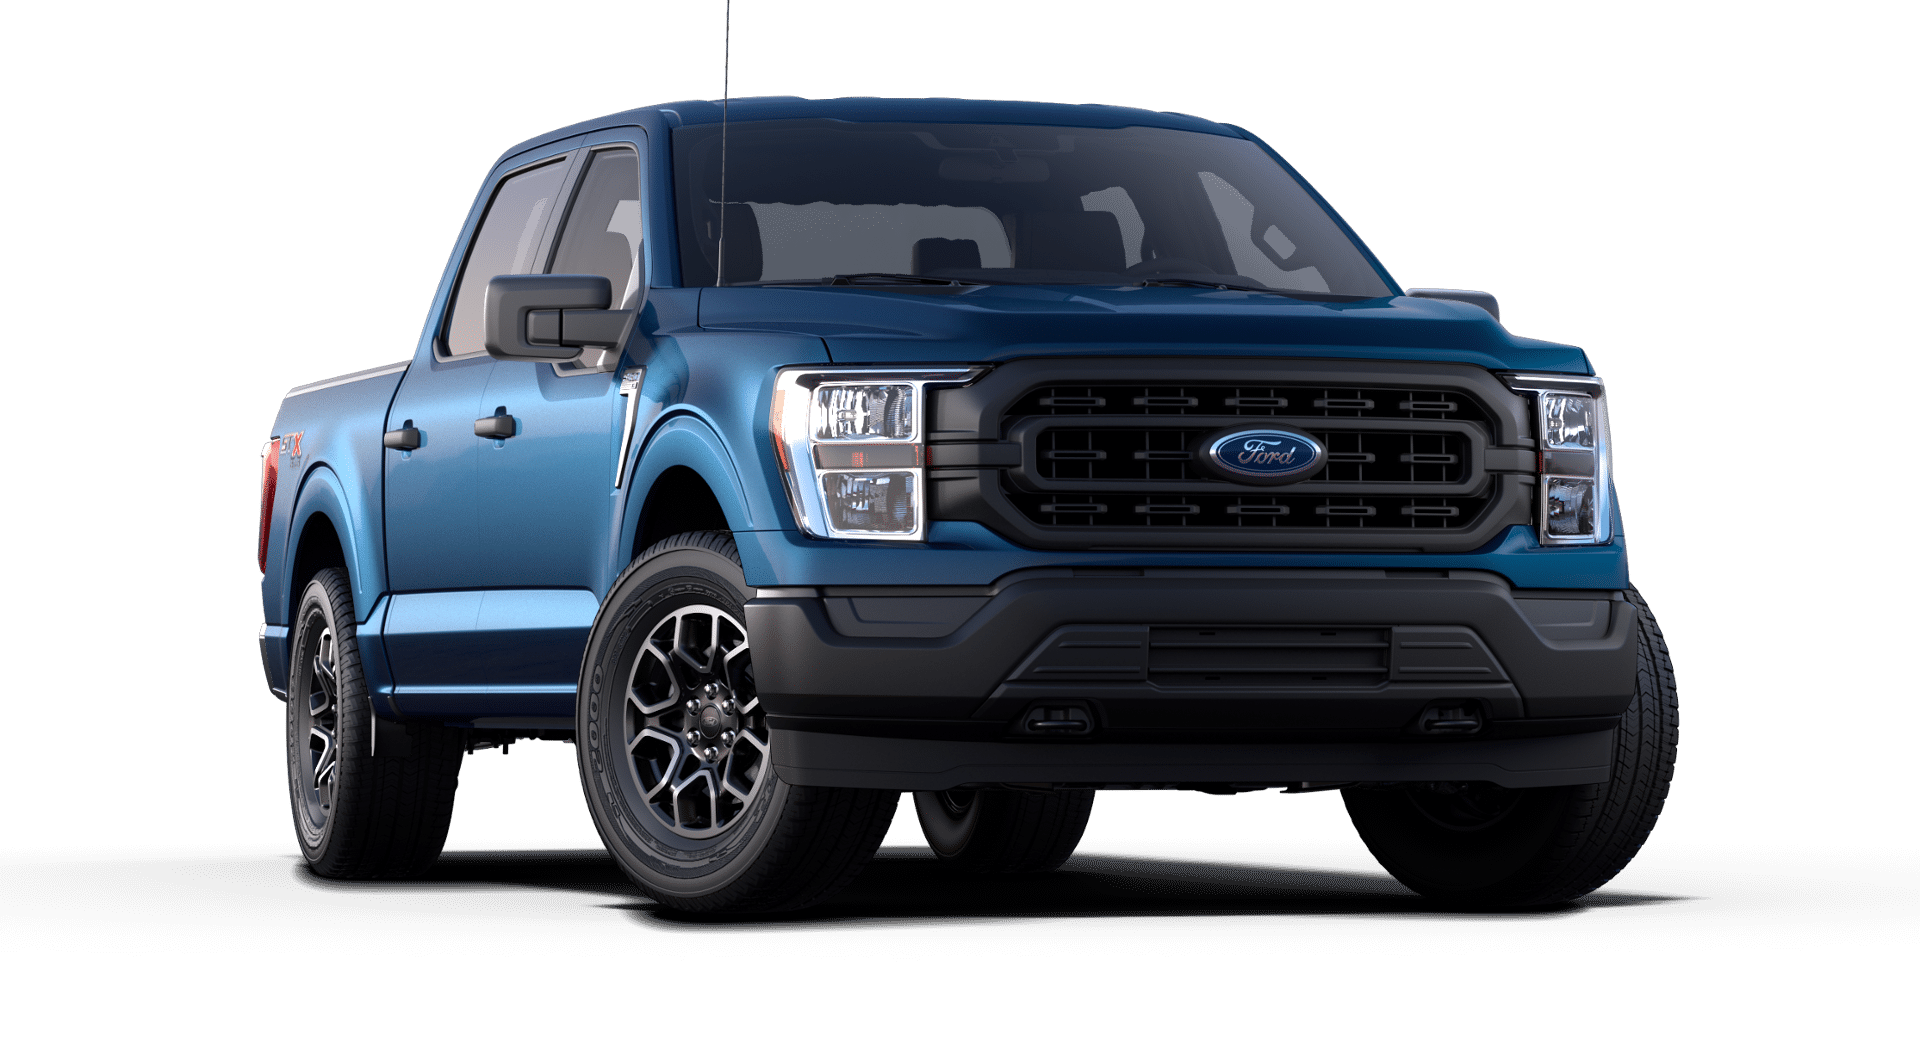 Ford F150 Lease Specials Explore Top 10 Videos & 106 Images